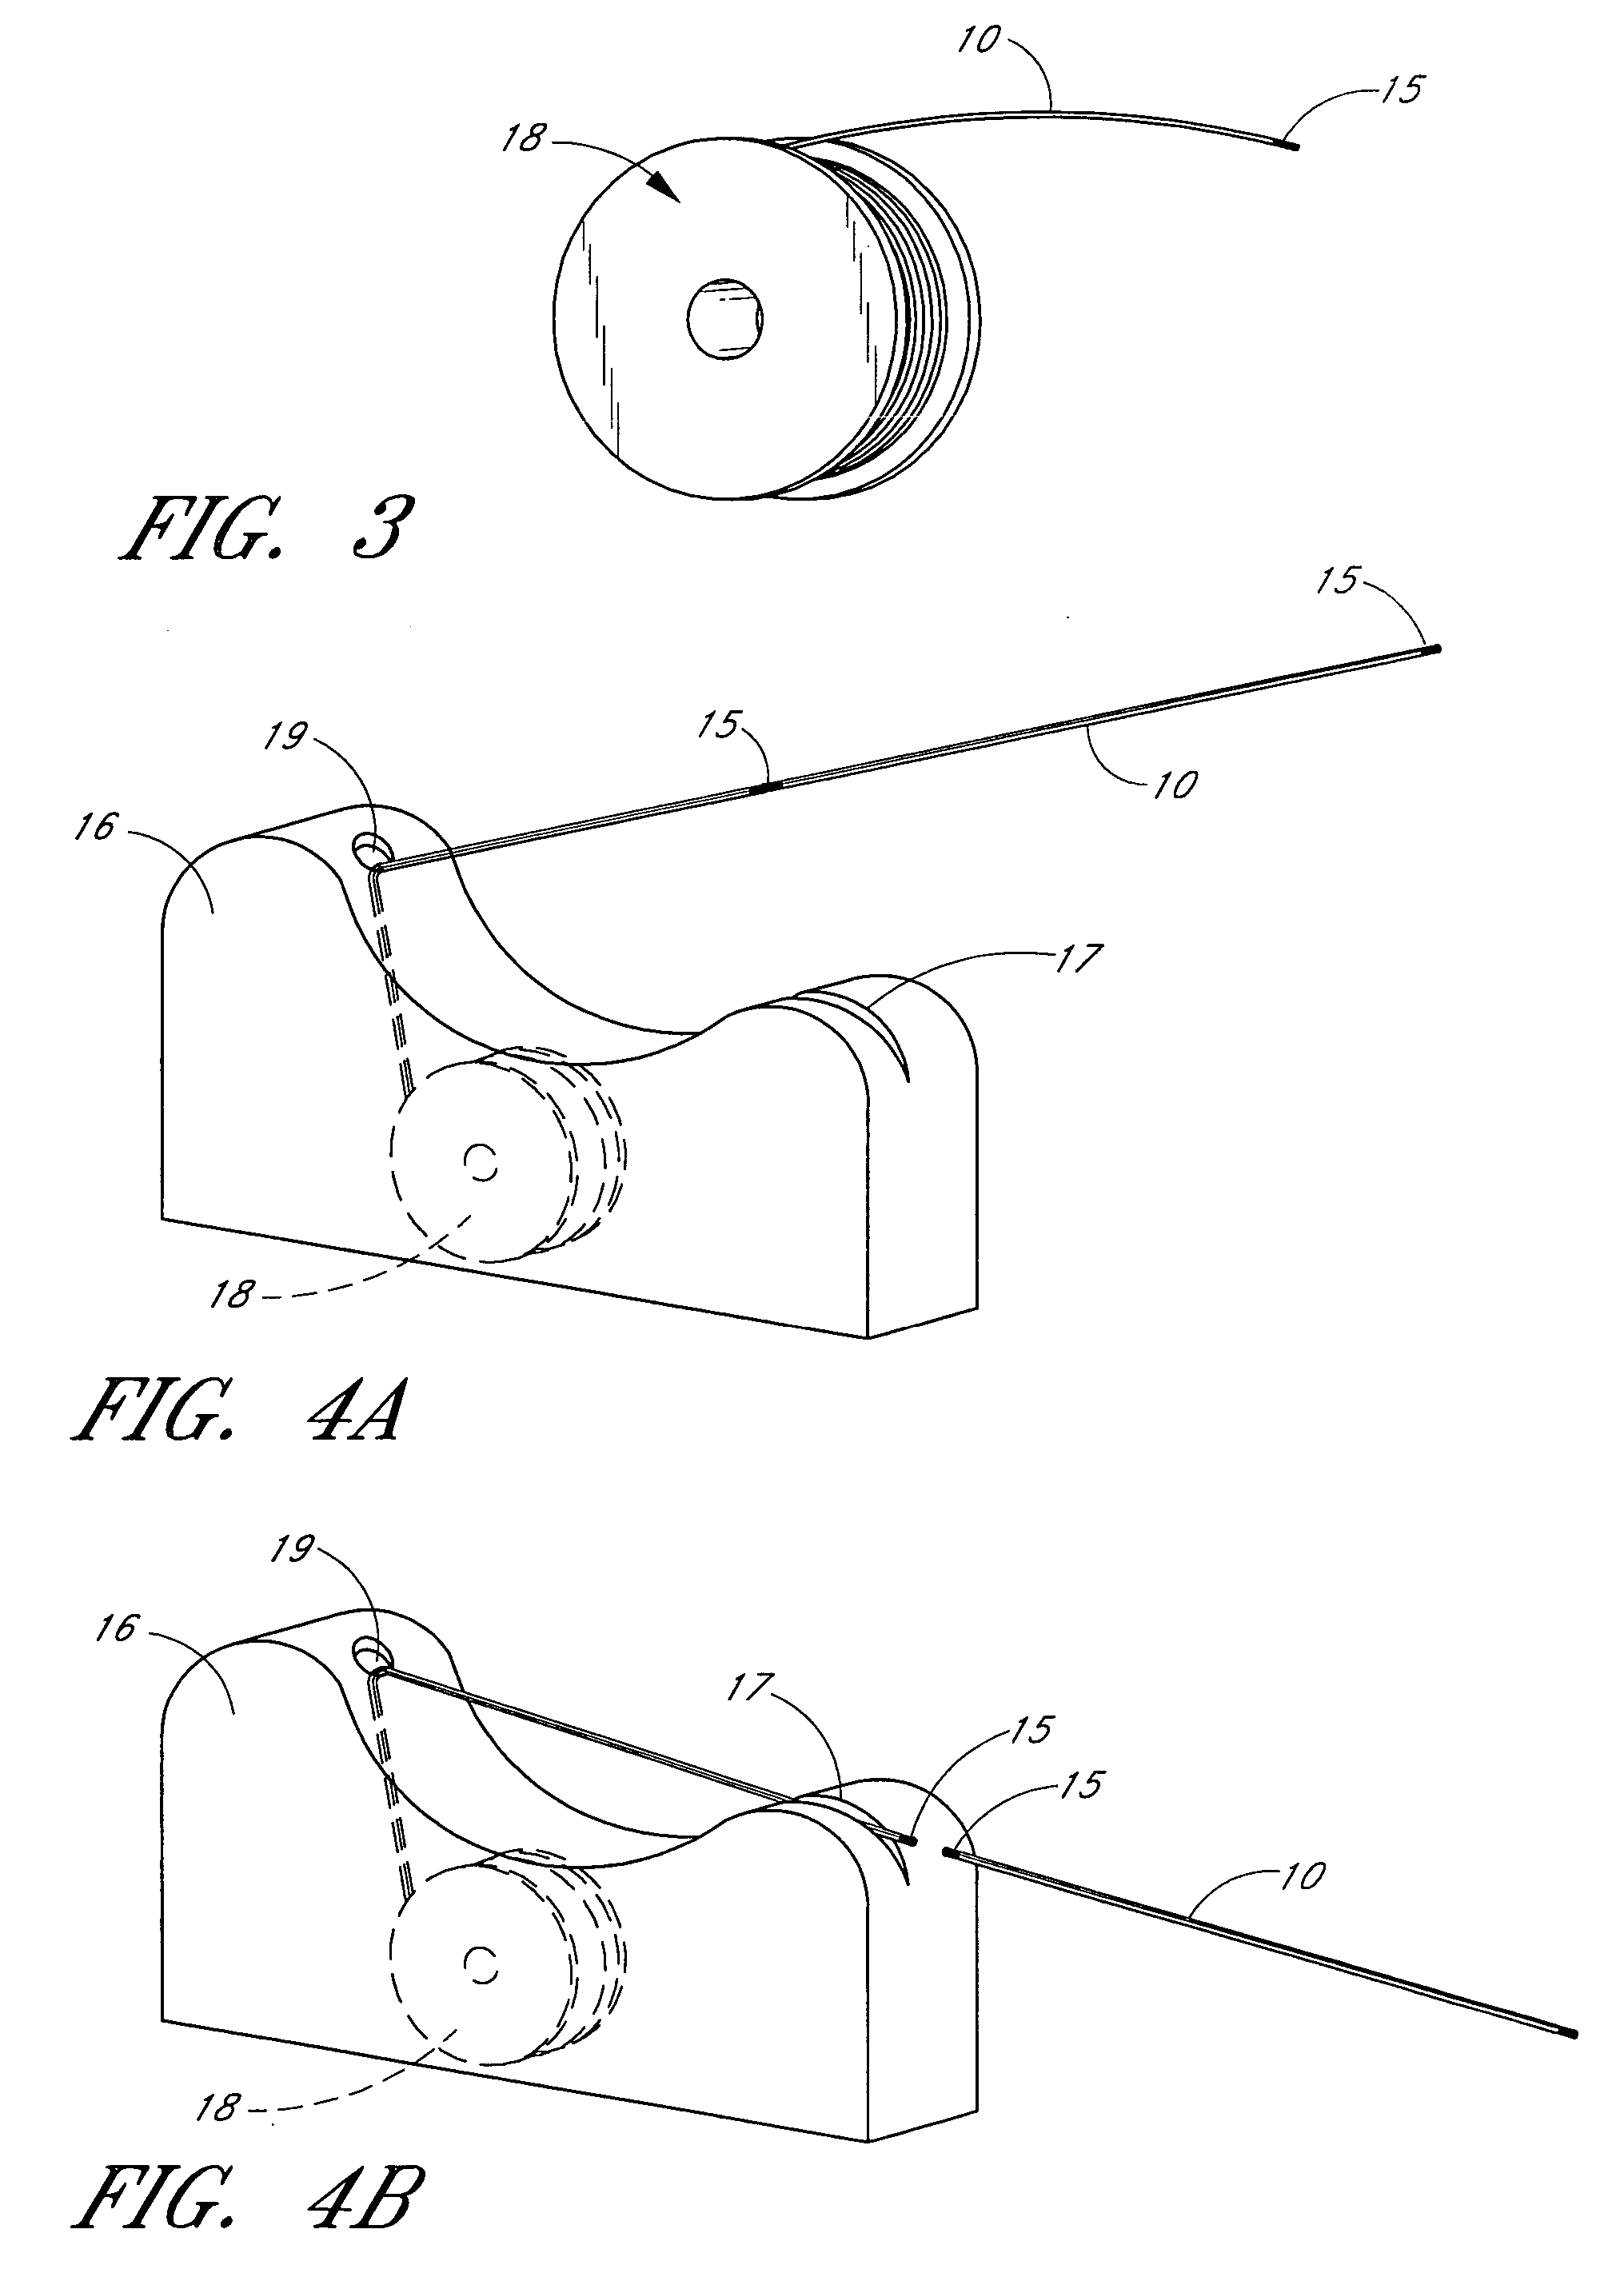 Continuous loop dental floss and methods of making and dispensing same